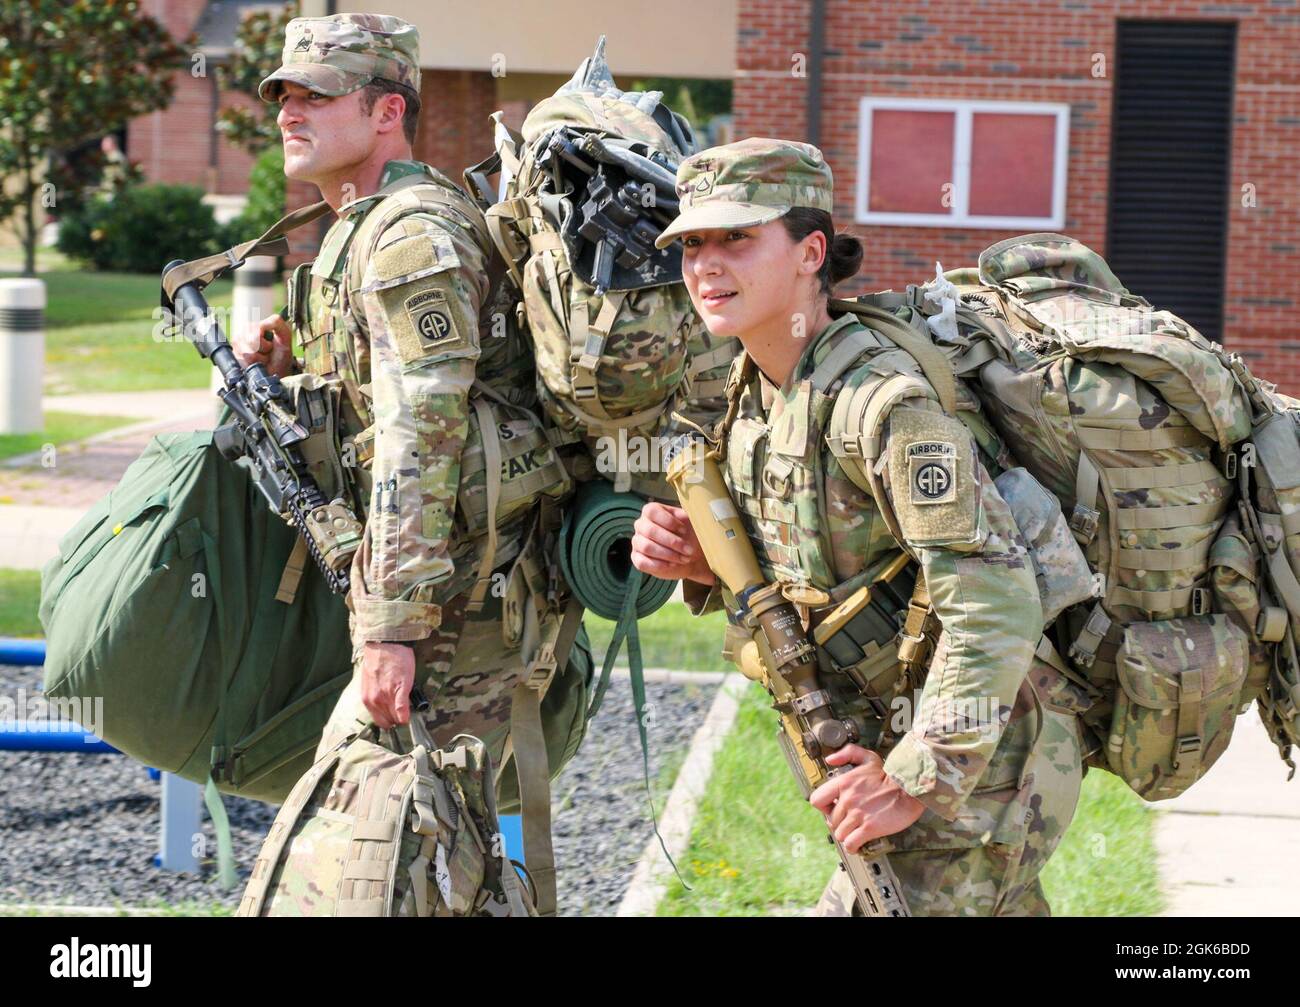 https://c8.alamy.com/comp/2GK6BDD/us-army-paratroopers-assigned-to-82nd-airborne-division-prepare-equipment-for-out-load-as-part-of-an-activation-of-the-immediate-response-force-at-fort-bragg-nc-on-august-13-2021-irf-brigades-are-capable-of-rapidly-deploying-to-anywhere-in-the-world-in-response-to-increased-threat-levels-or-as-a-precautionary-measure-to-safeguard-us-personnel-or-facilities-2GK6BDD.jpg